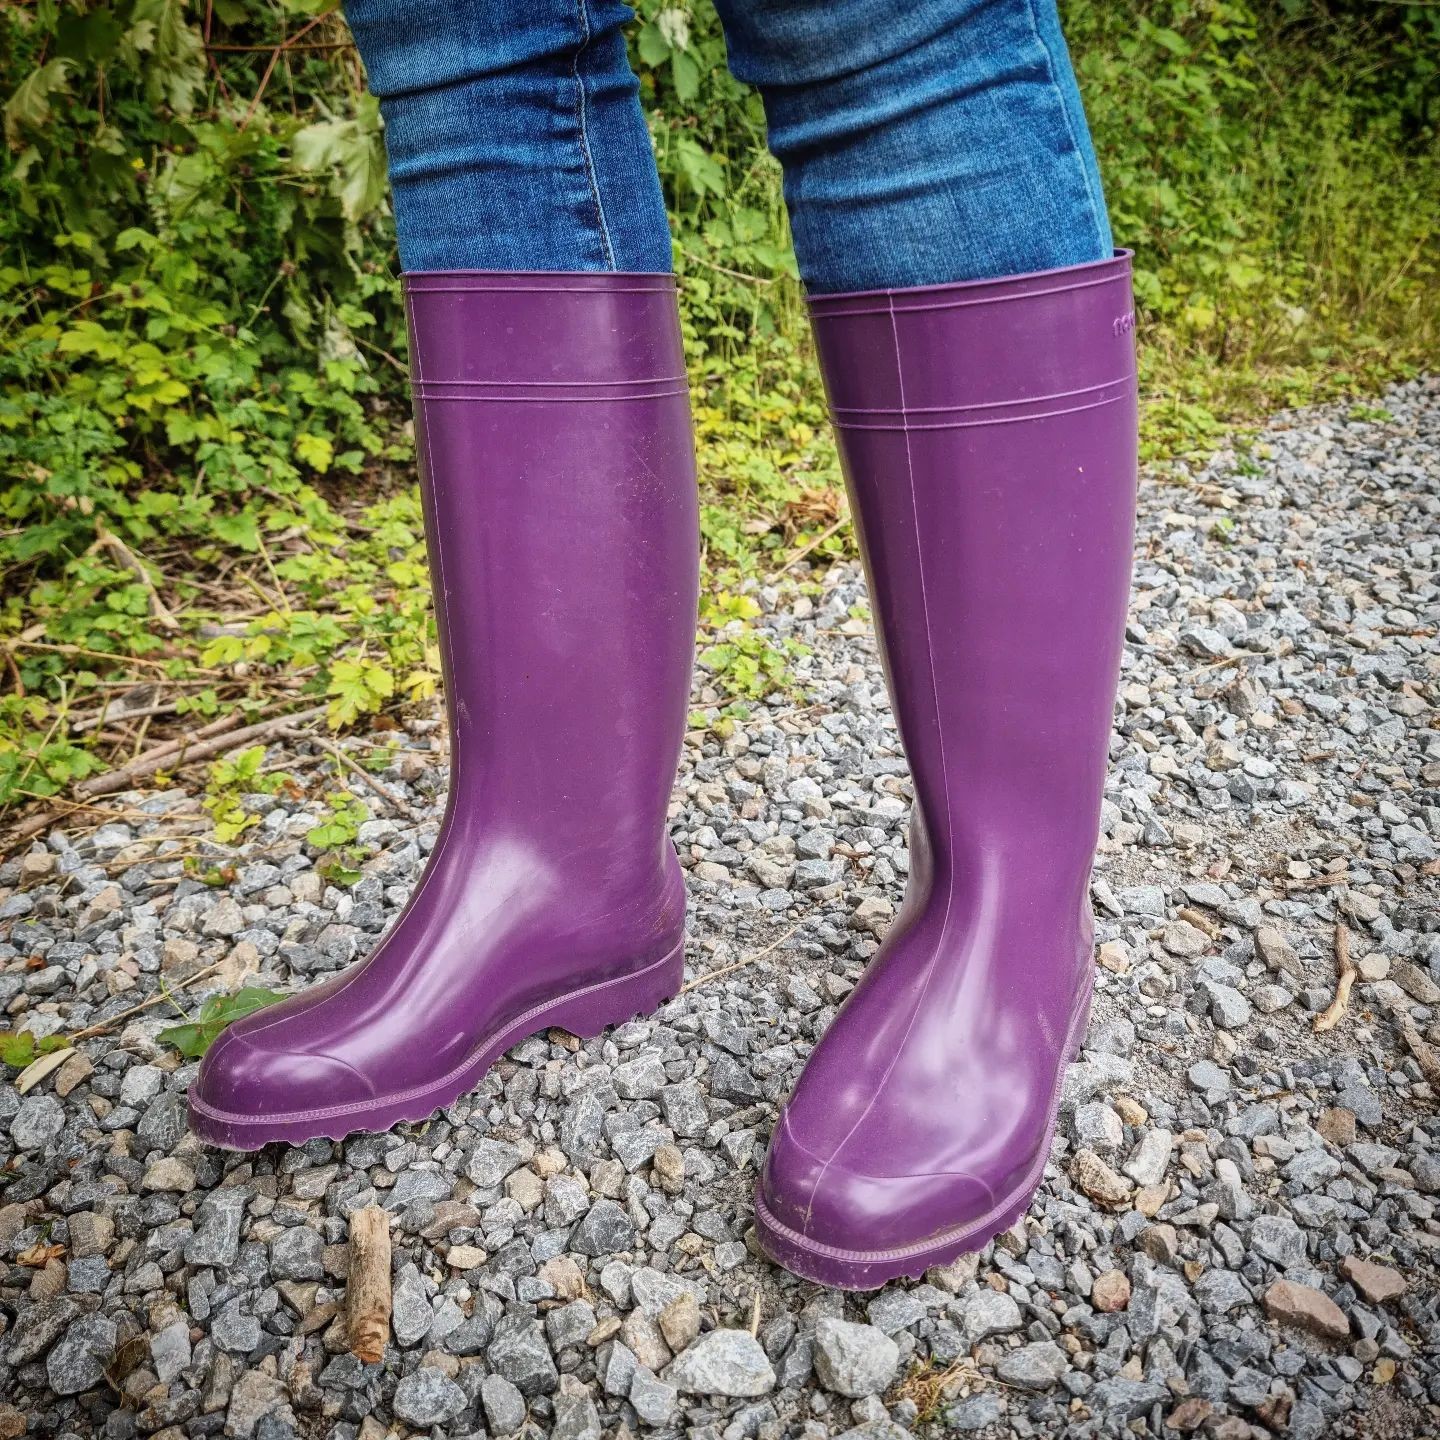 Clean and Shiny Rain Boots